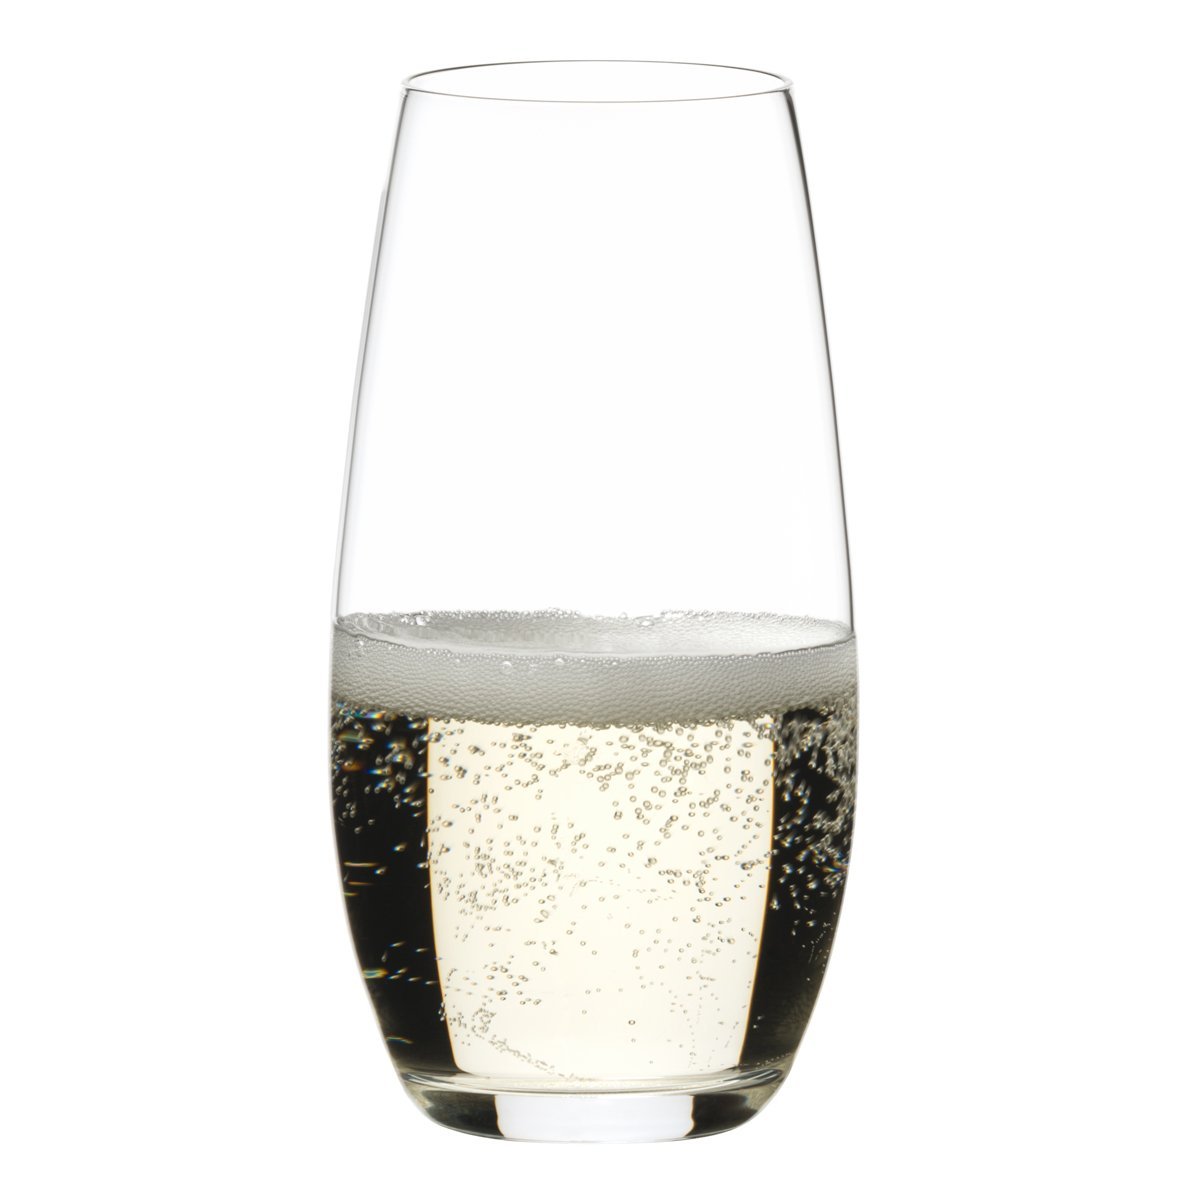 https://www.12x75.com/wp-content/uploads/2018/03/Riedel-Stemless-Champagne-Flutes.jpg